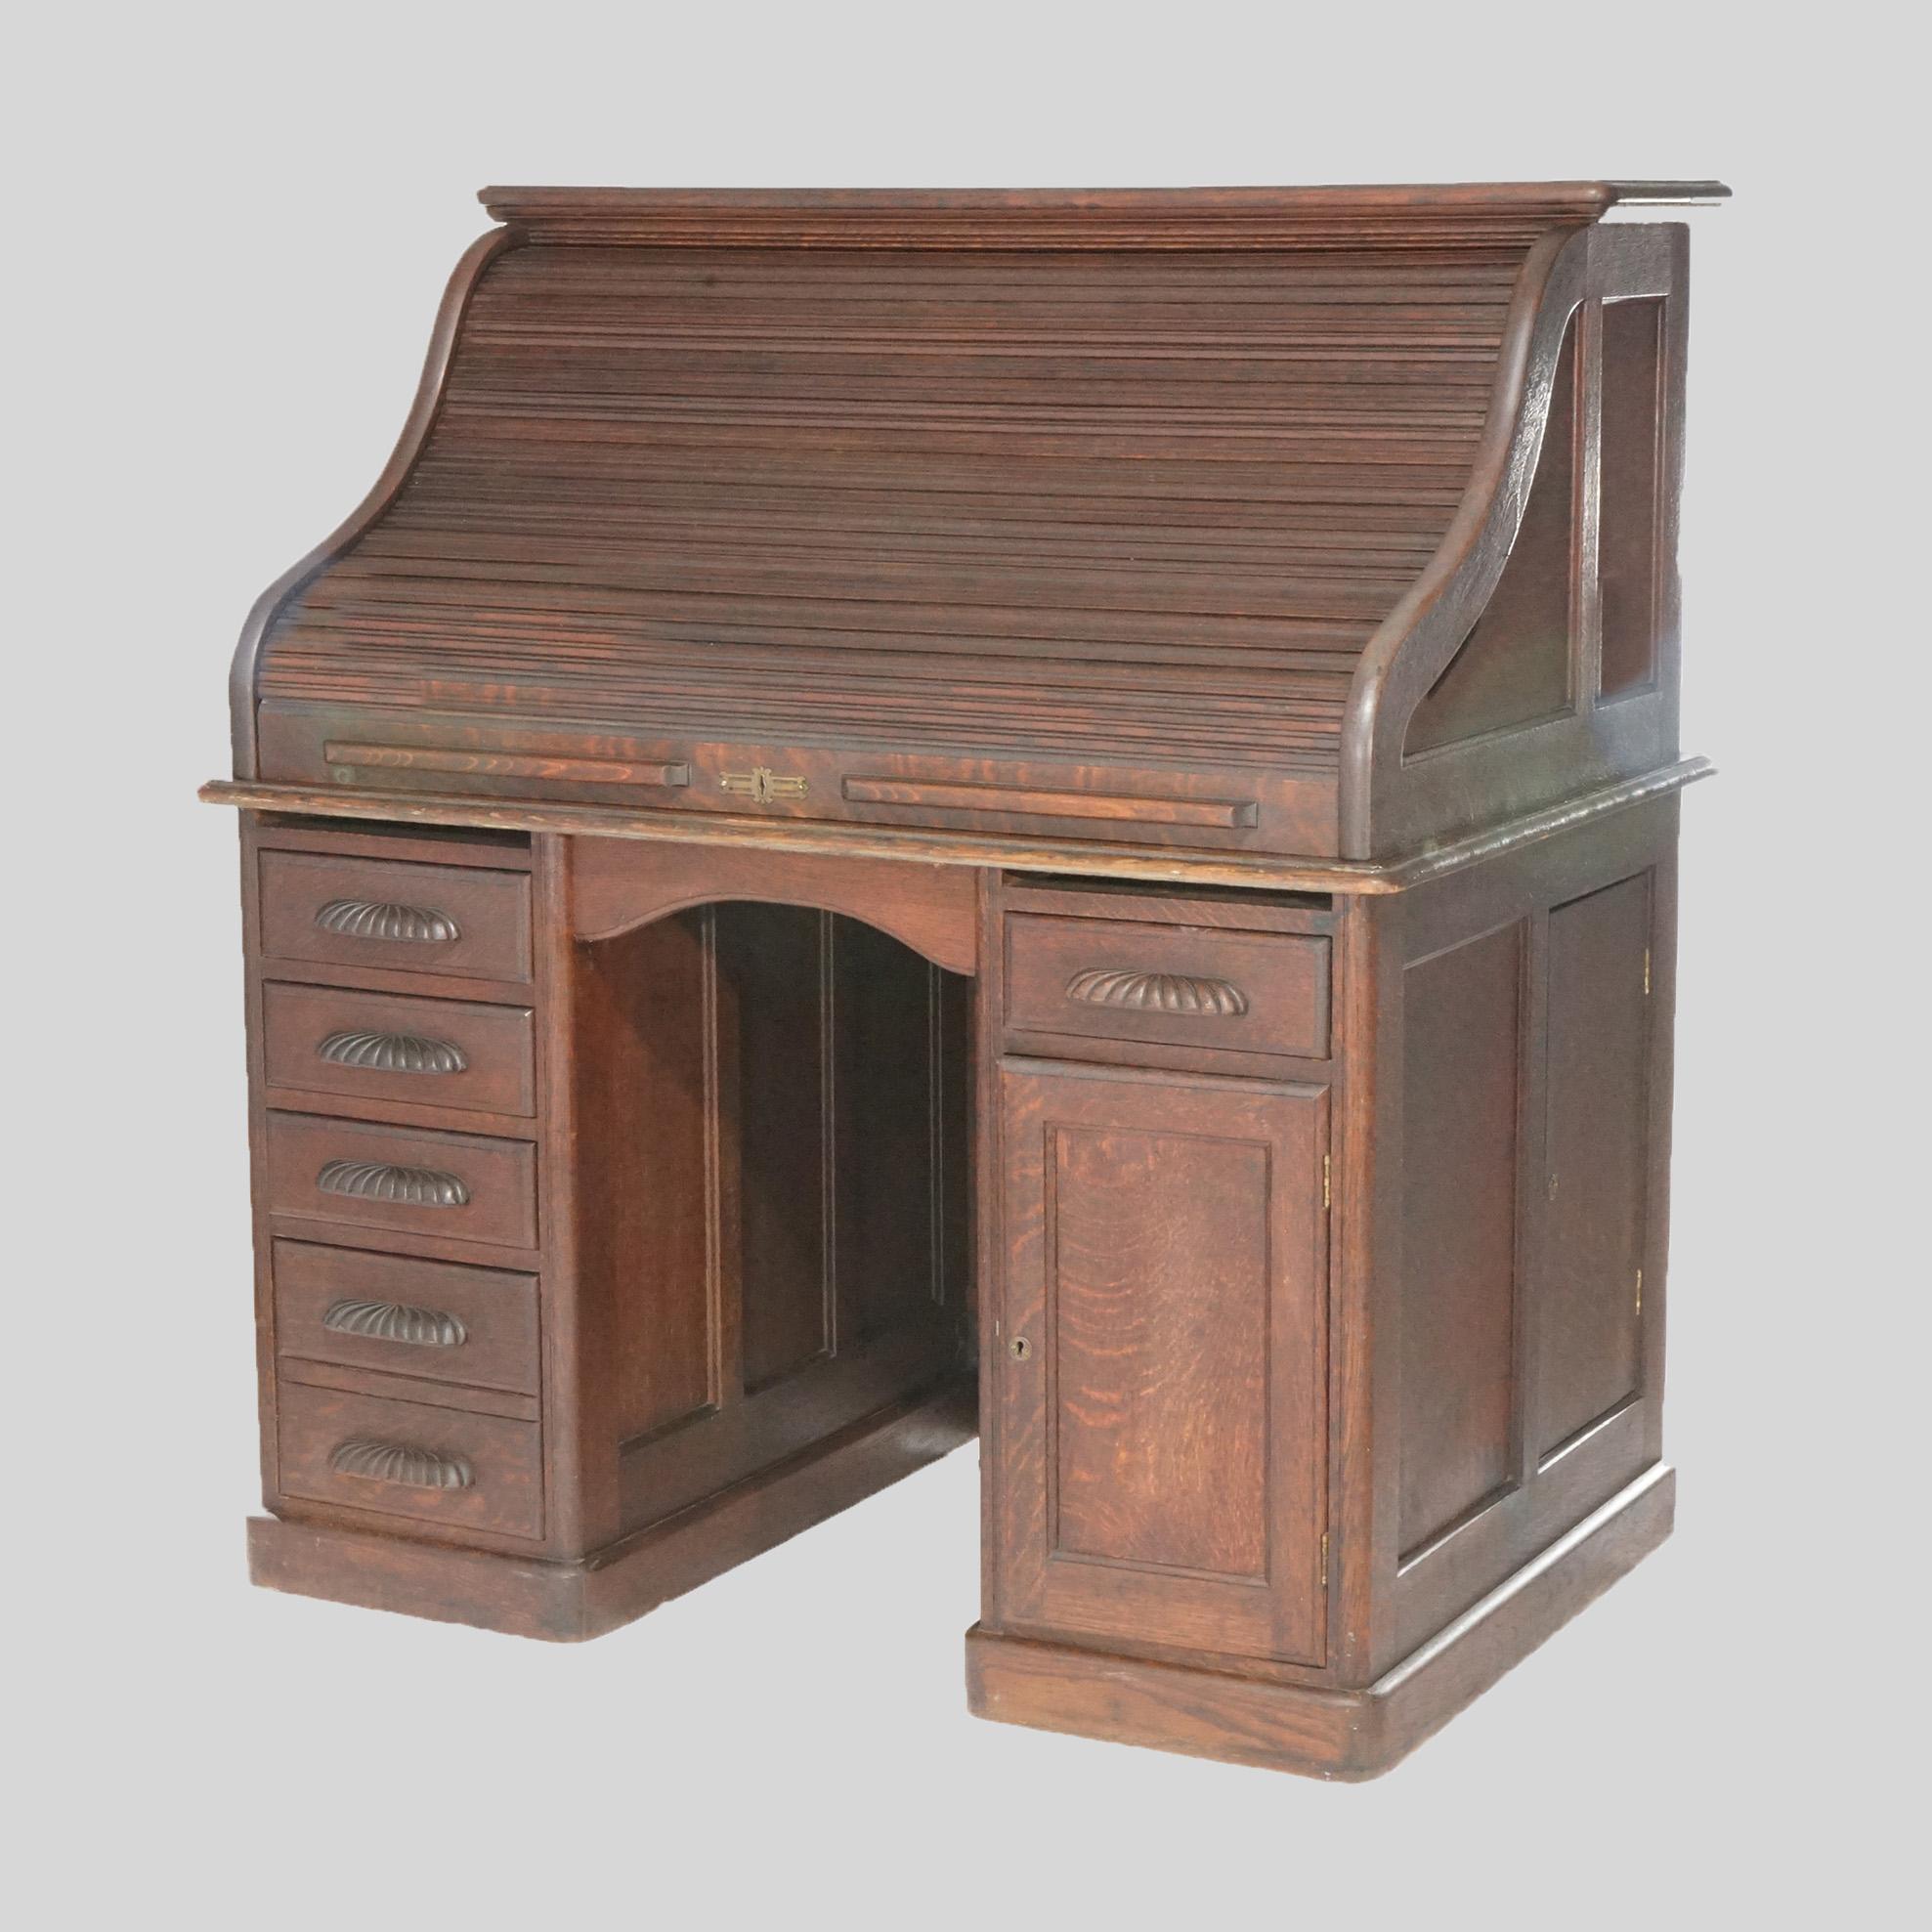 An antique desk offers oak paneled construction with s-roll top opening to full interior over base having drawers and cabinet, circa 1900.

Measures- 52.5''H x 48''W x 32.75''D.